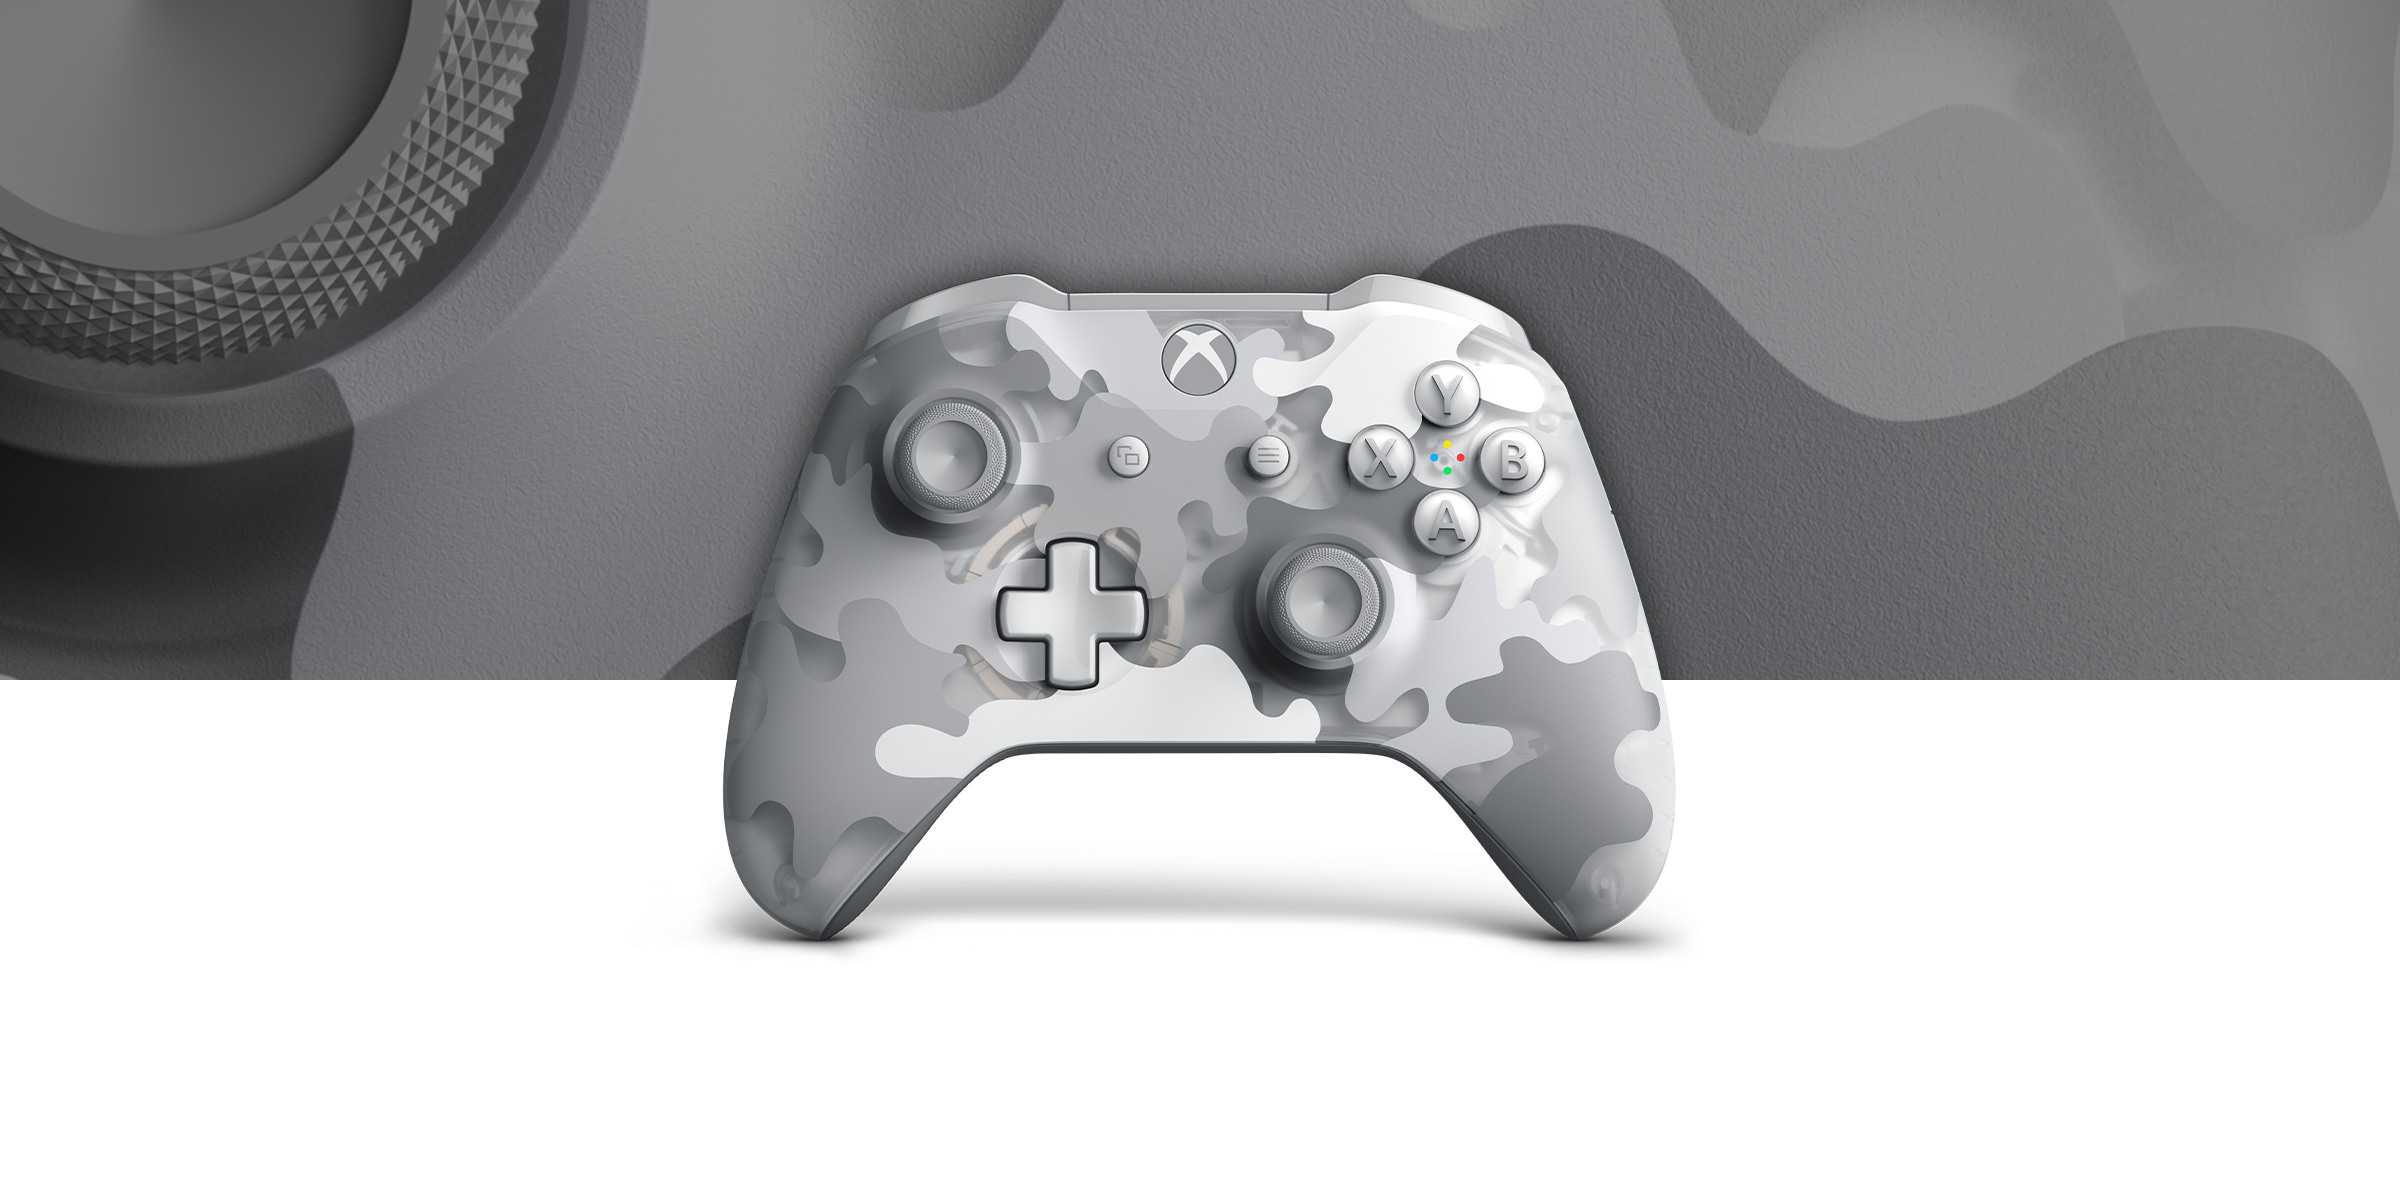 camouflage xbox controller